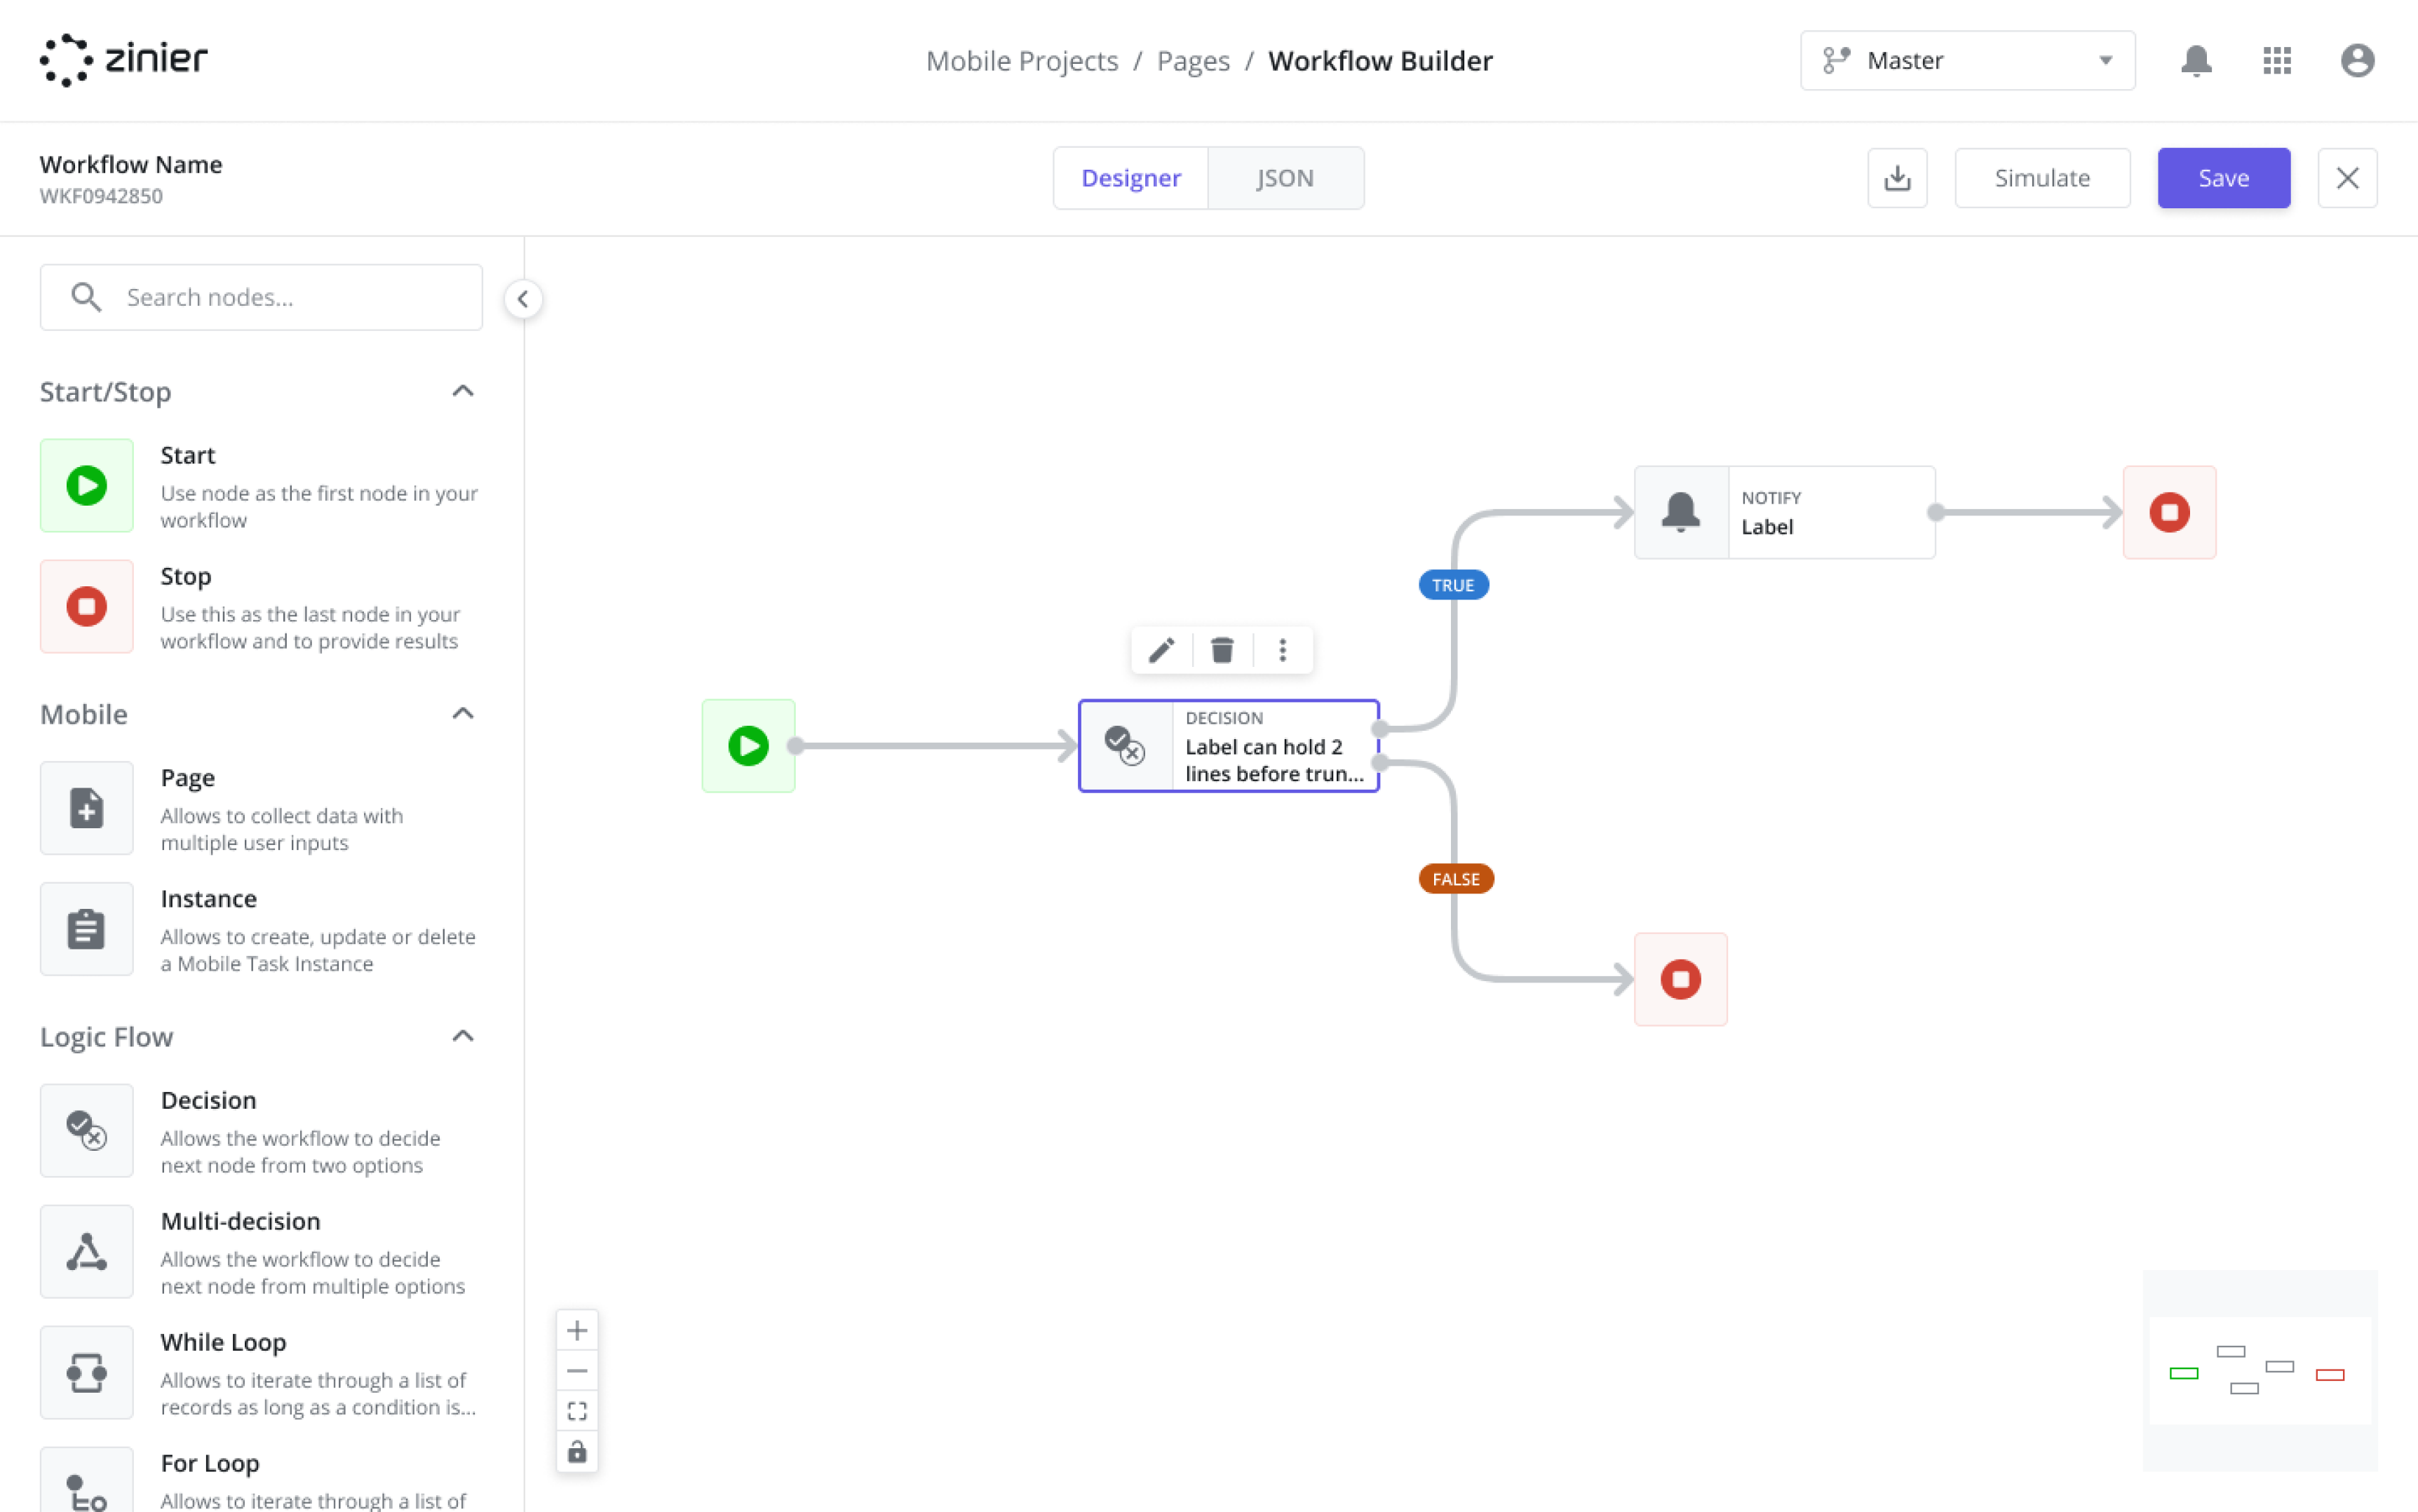 Workflow Builder. Build and simulate any workflow with Zinier's drag-and-drop UI